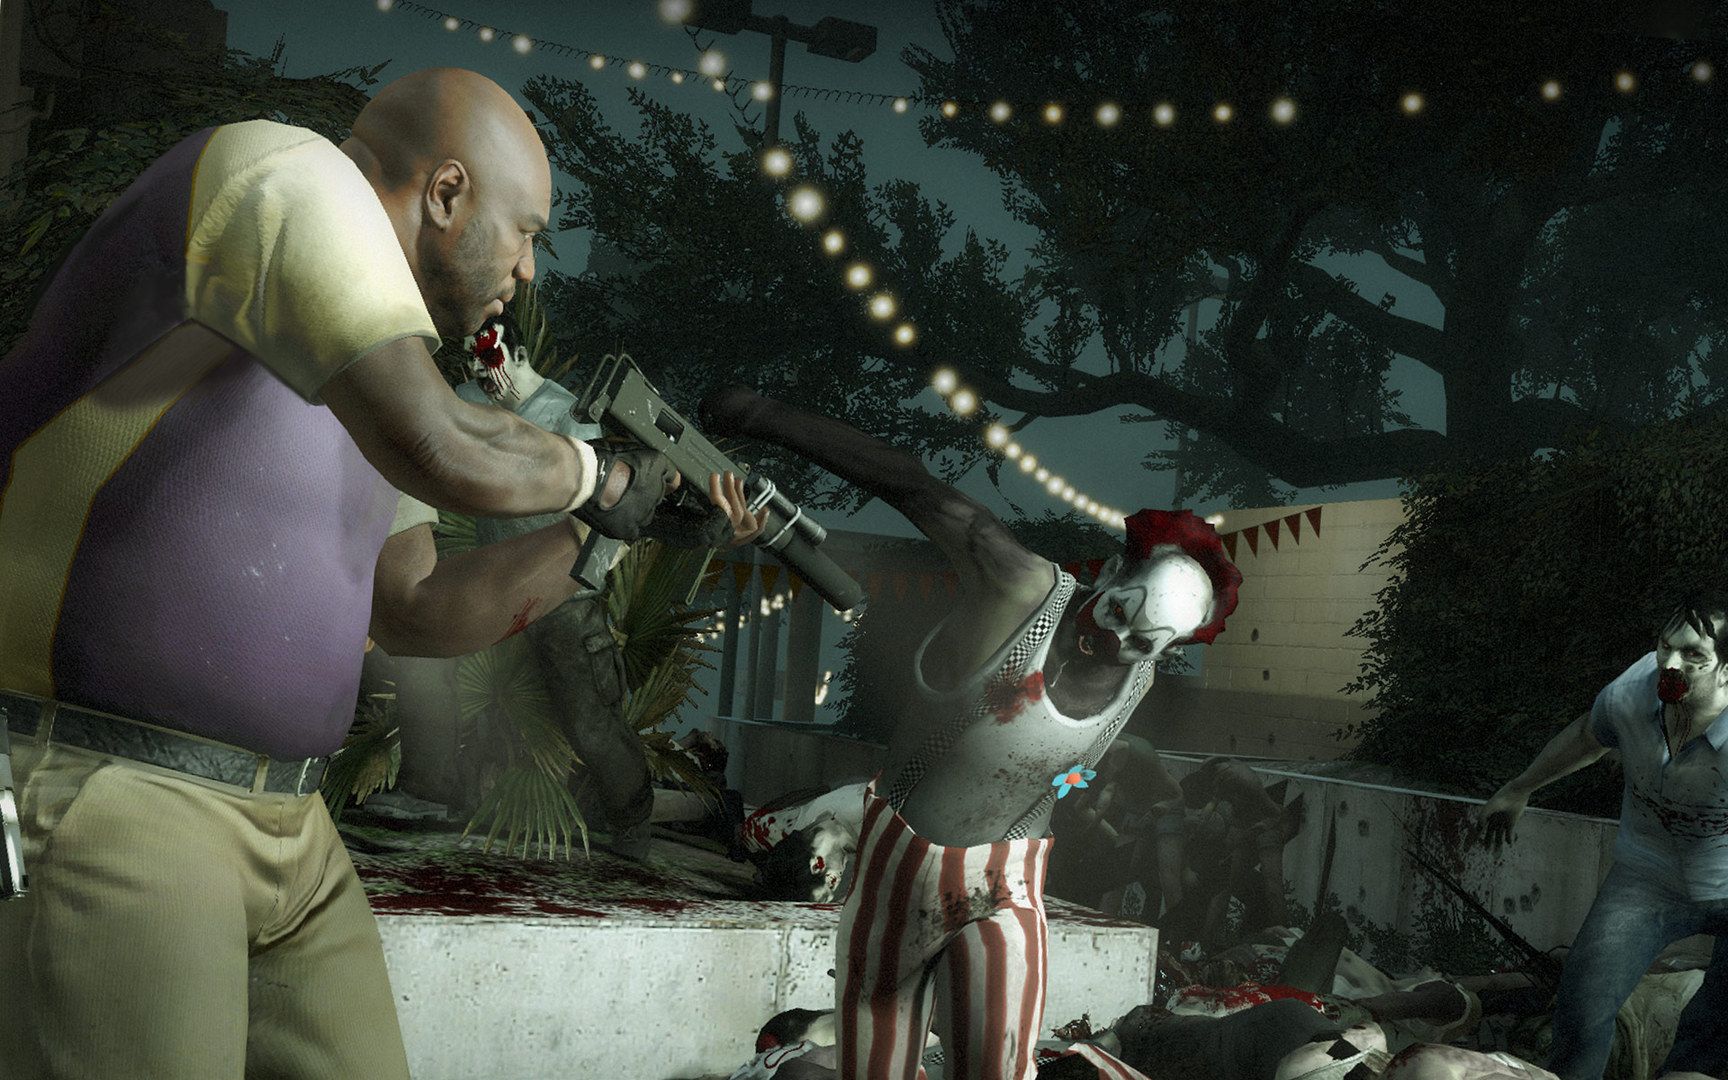 Coach takes aim at a clown zombie in Left 4 Dead 2